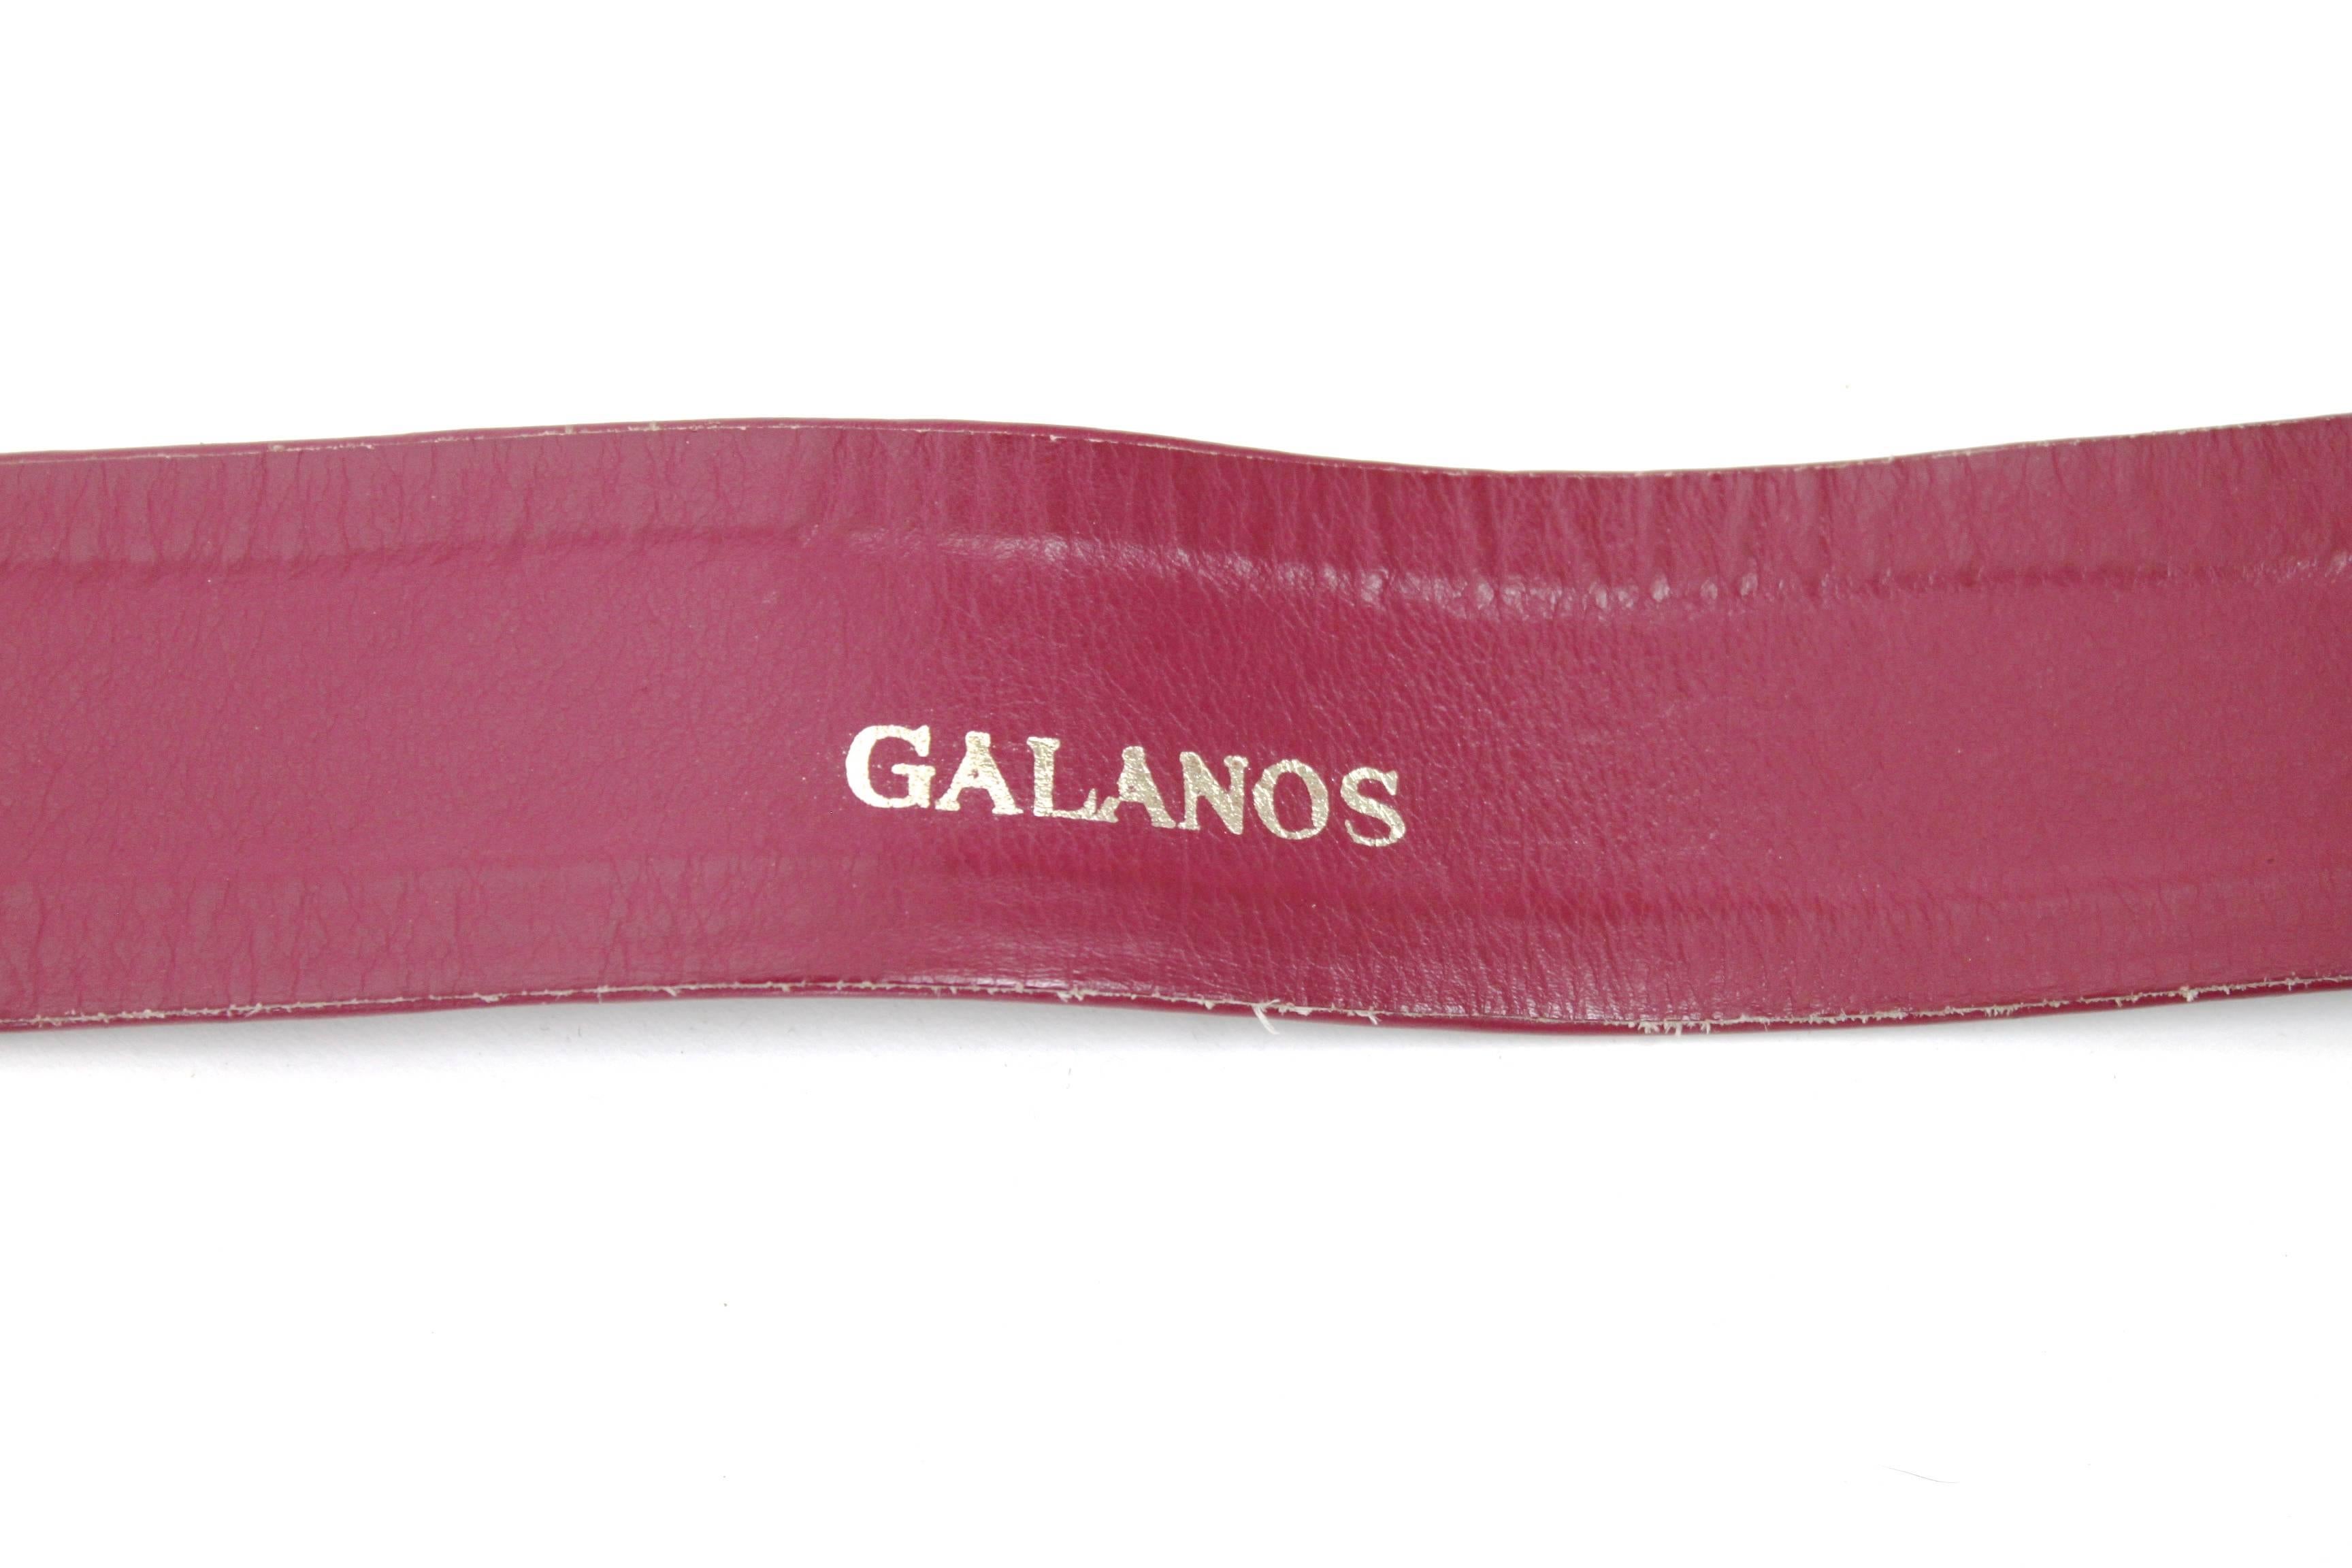 Galanos Magenta Snakeskin Belt with Rhinestone Buckle In Excellent Condition For Sale In Los Angeles, CA